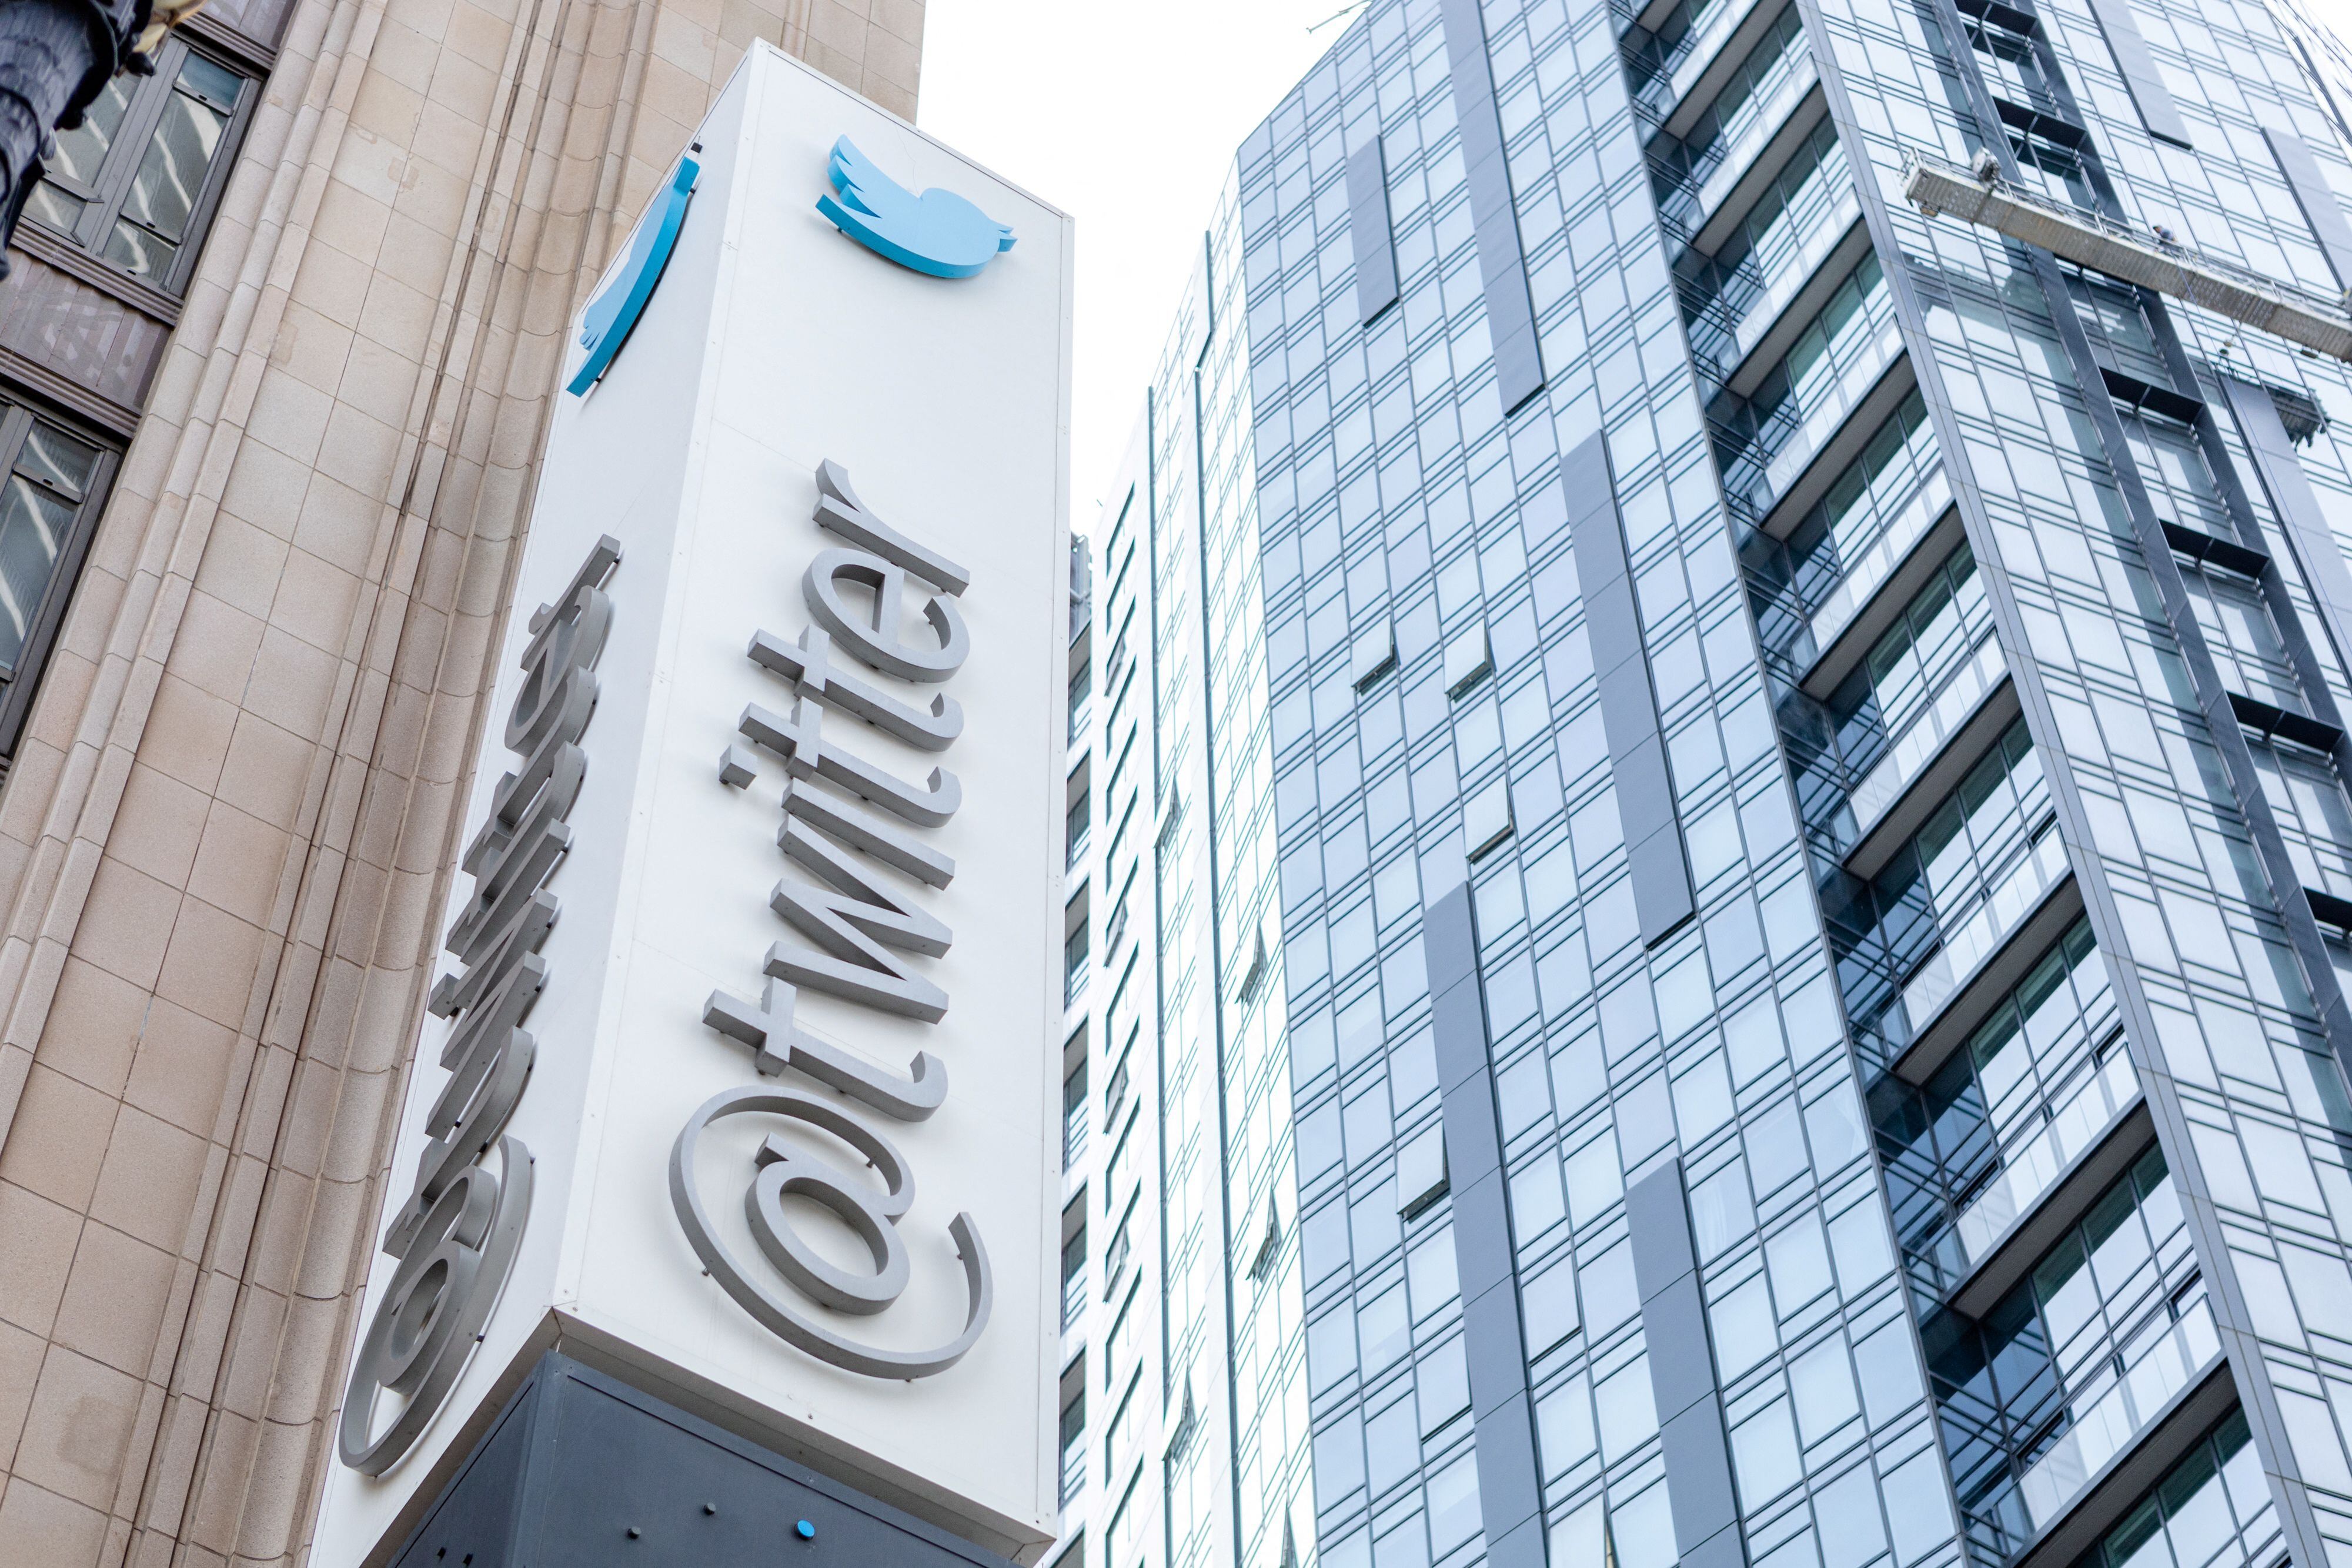 (FILES) In this file photo taken on October 28, 2022, the Twitter sign is seen at their headquarters on October 28, 2022 in San Francisco, California. - Twitter said it will start laying off employees on November 4, 2022, as the new billionaire owner Elon Musk moves quickly after his big takeover to make the messaging platform financially sound. (Photo by Constanza HEVIA / AFP)